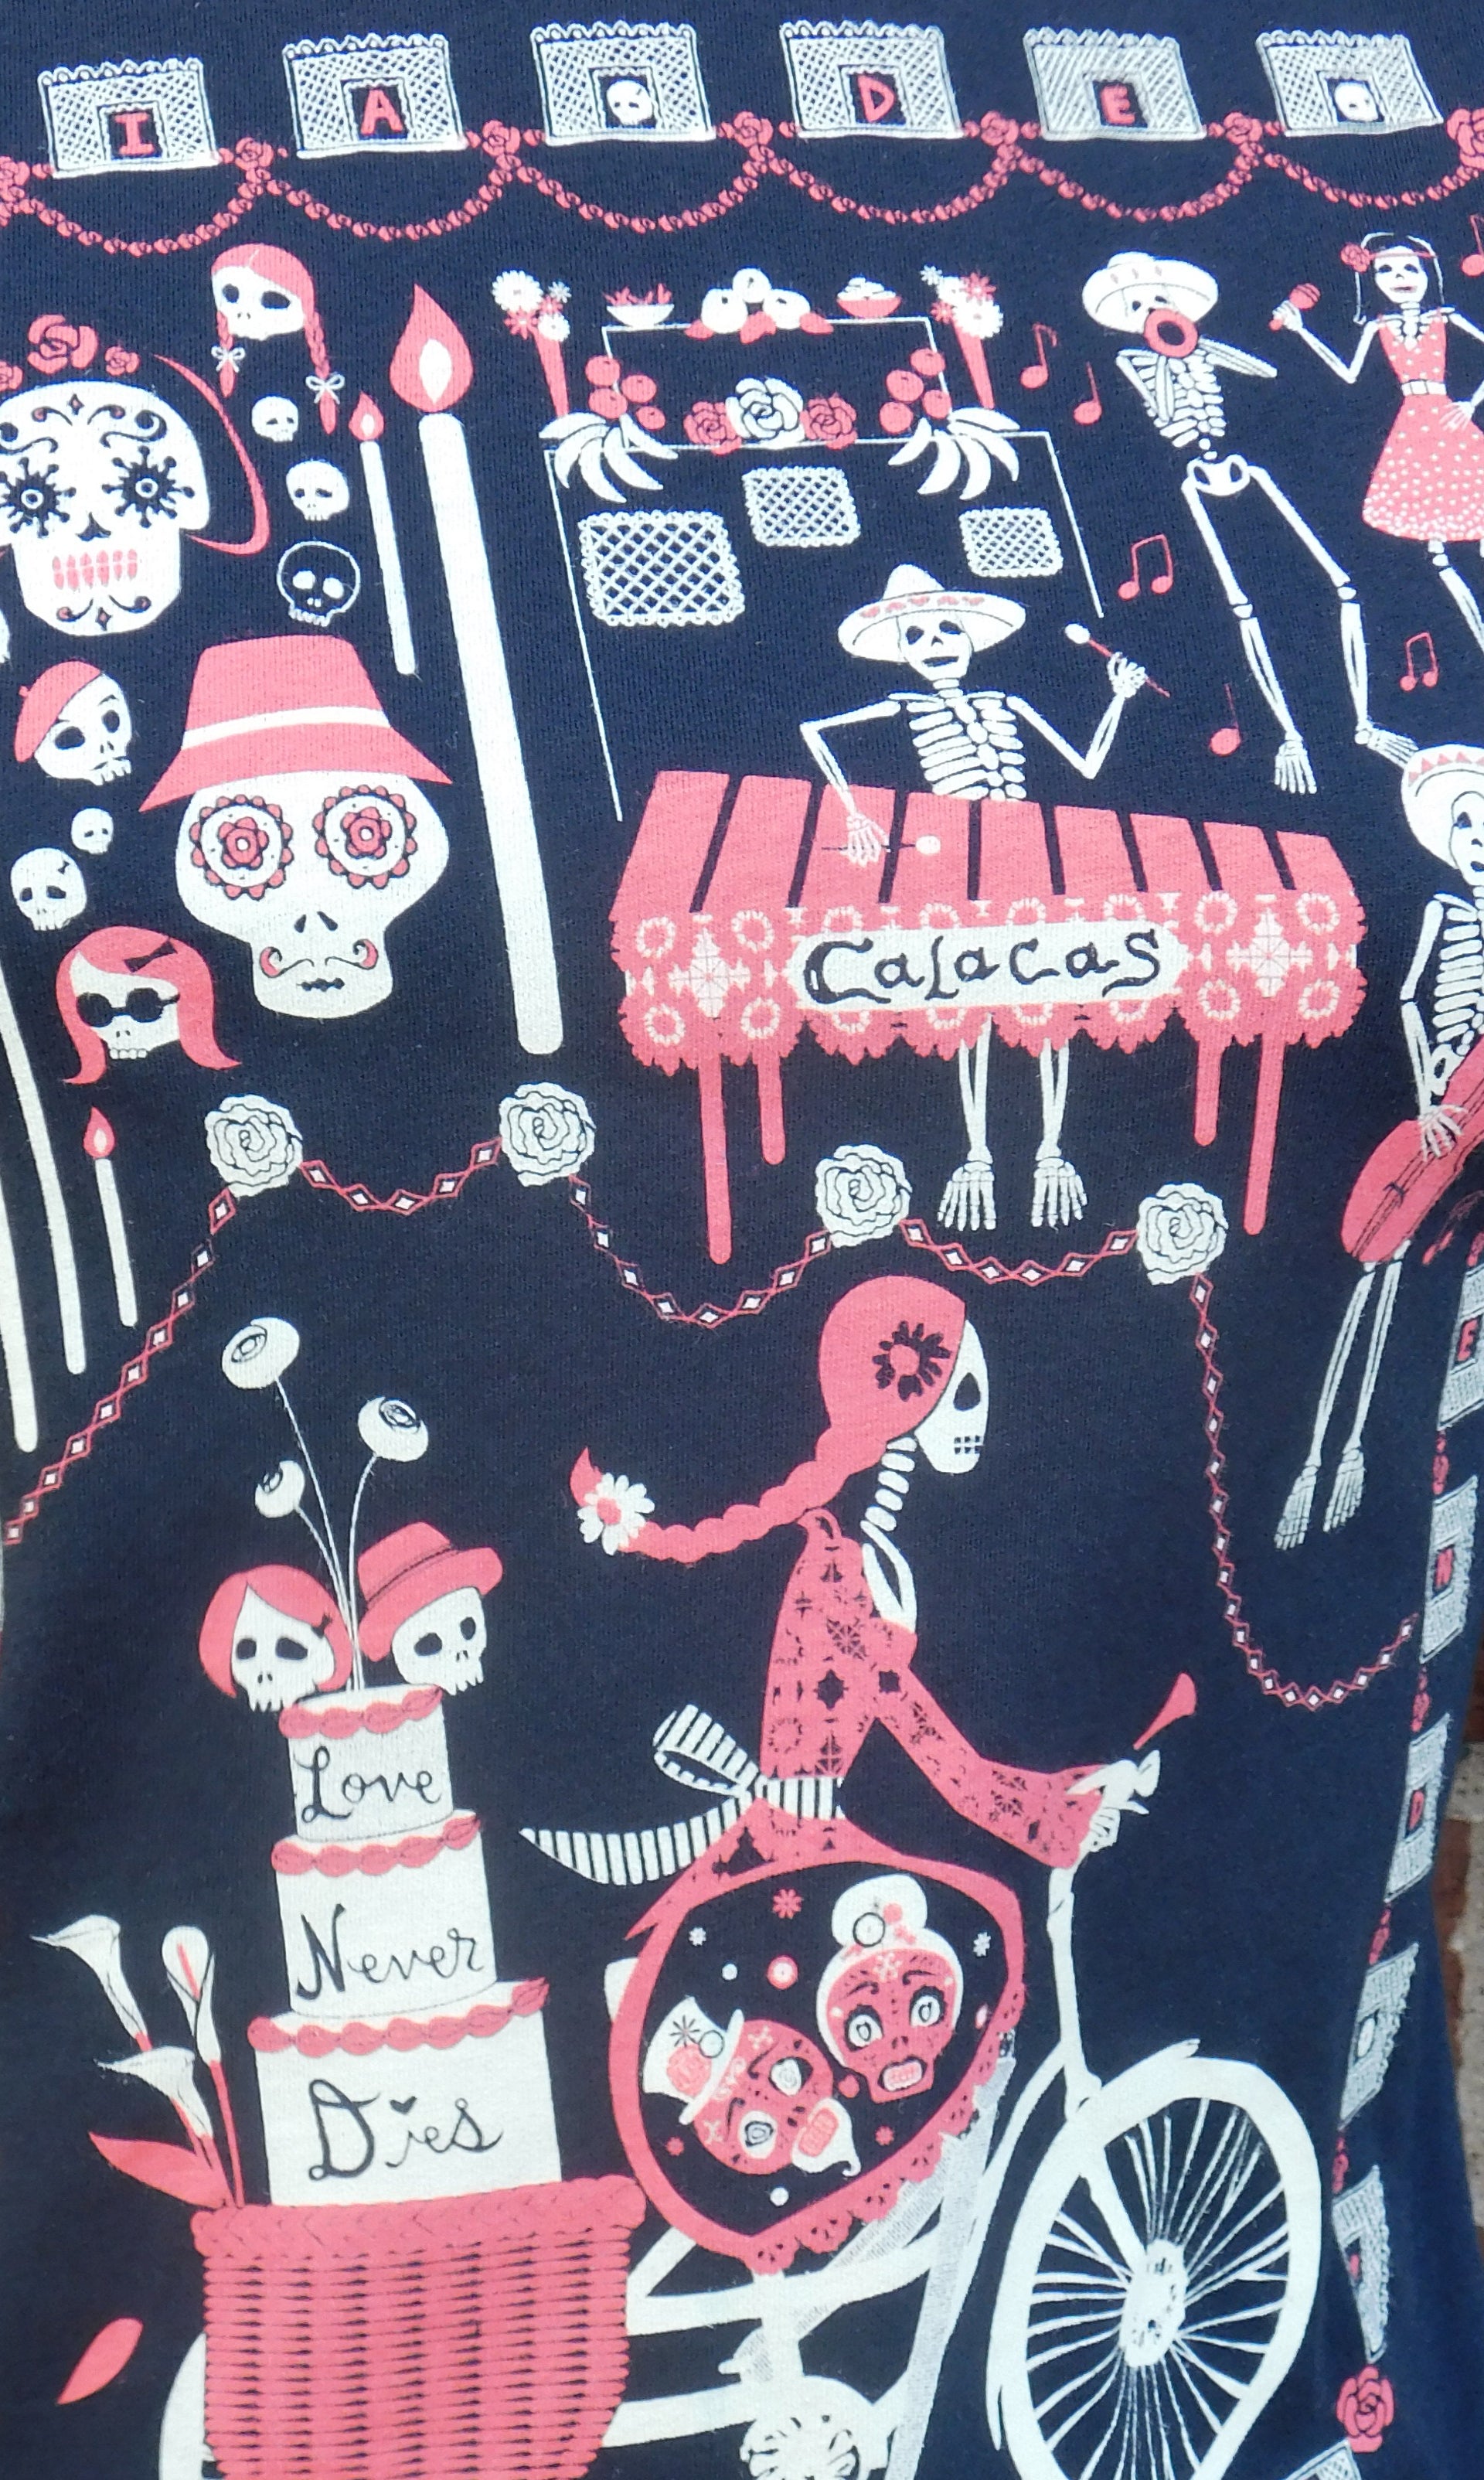 Close up of print featuring skeletons at a celebration